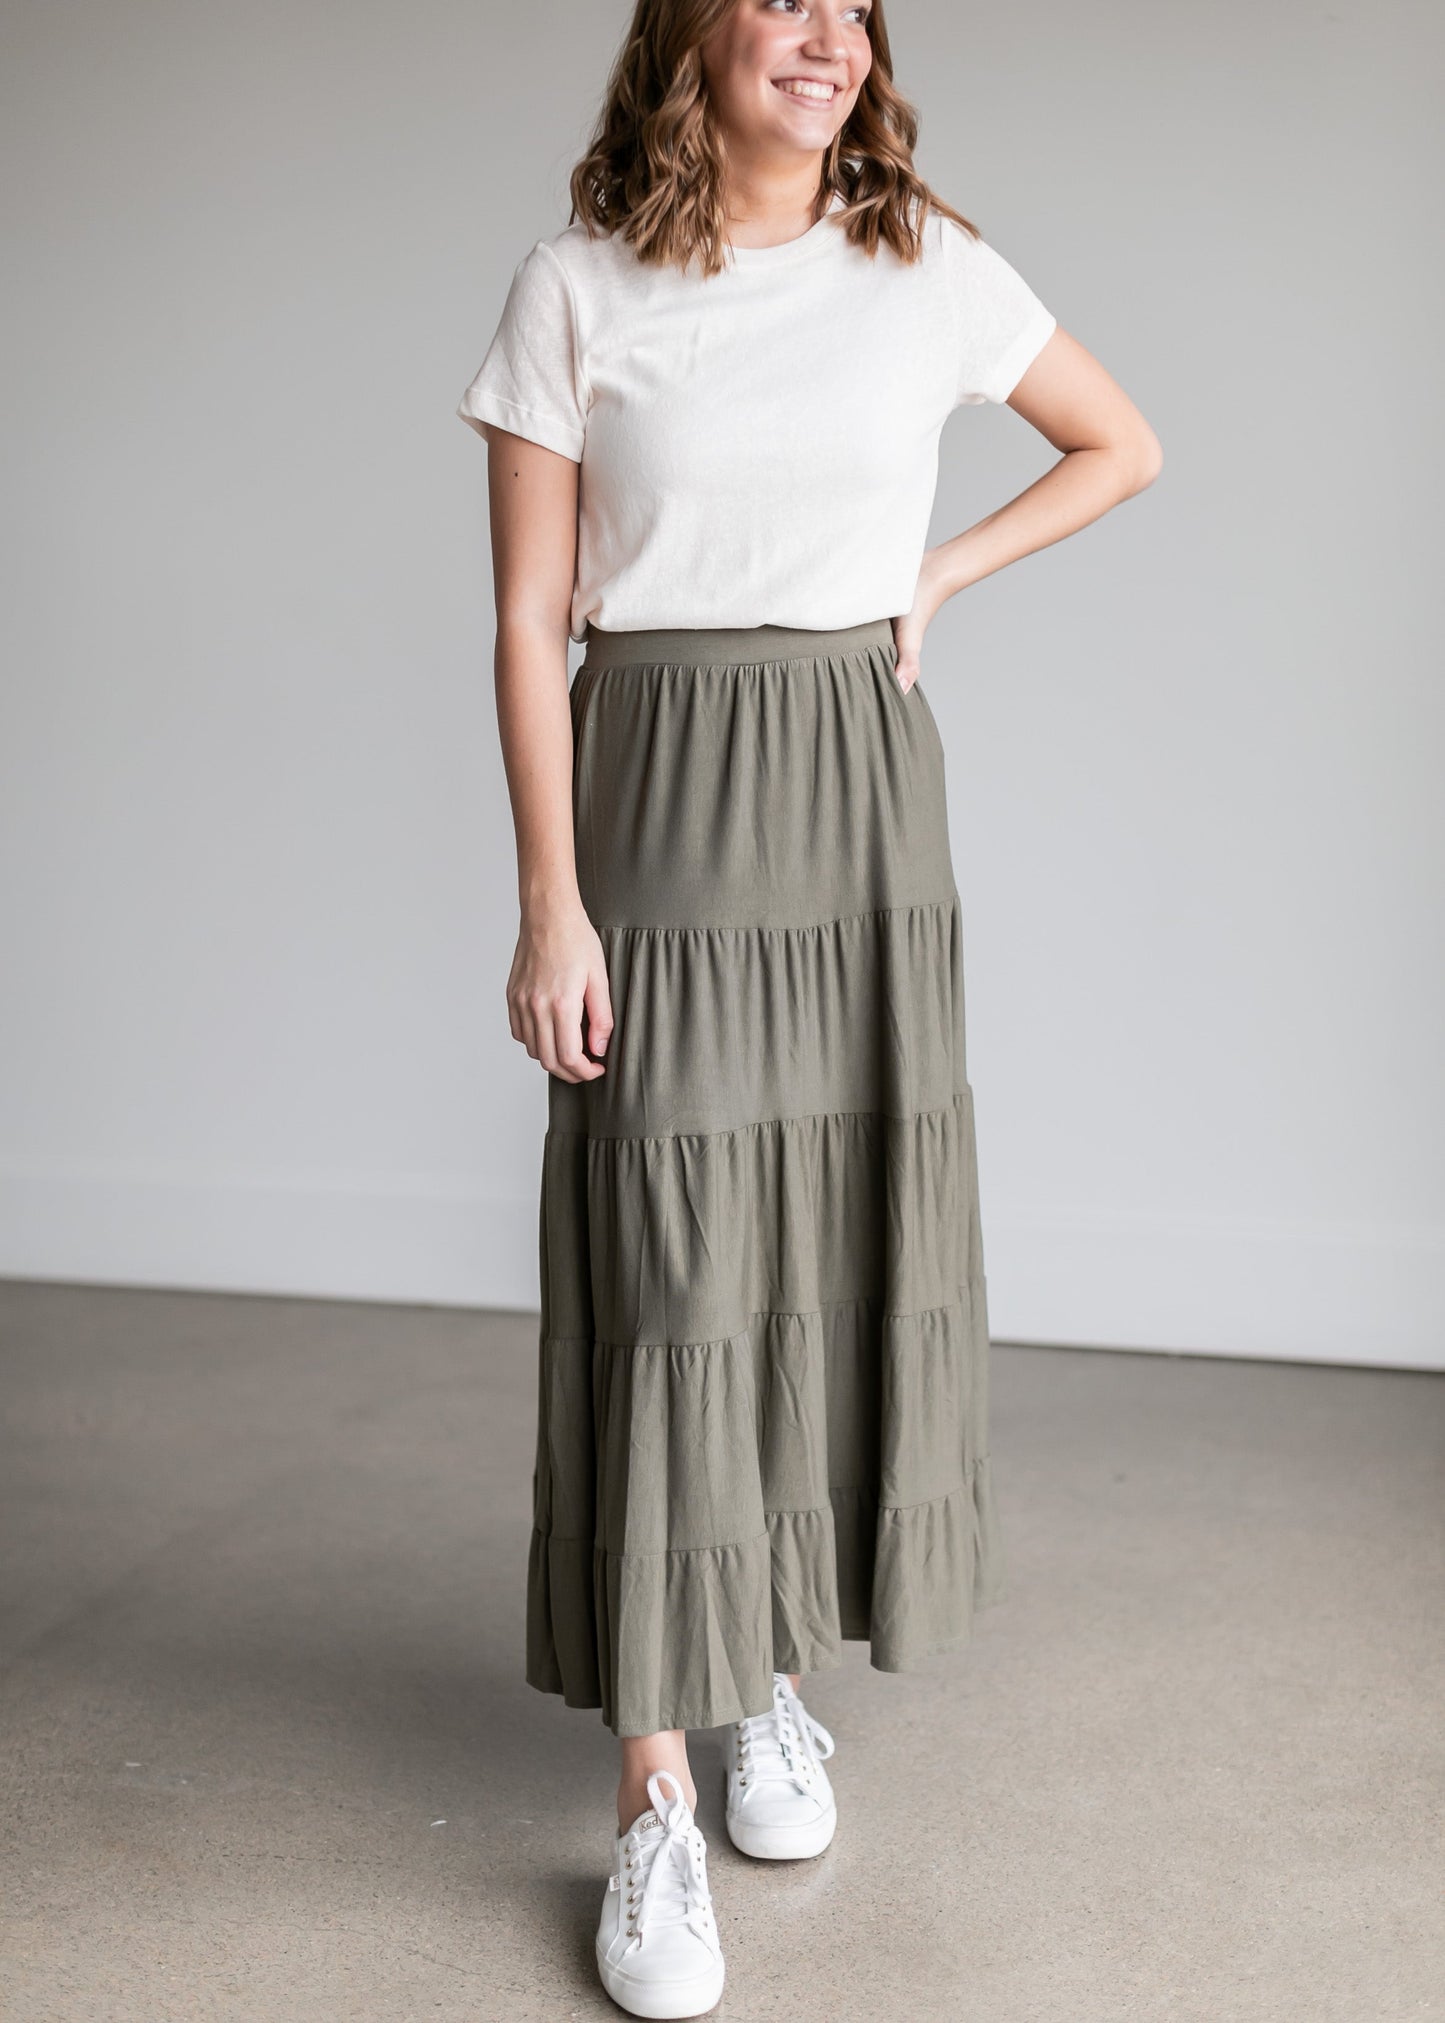 Pull-On Stretch Waist Tiered Maxi Skirt - FINAL SALE FF Skirts